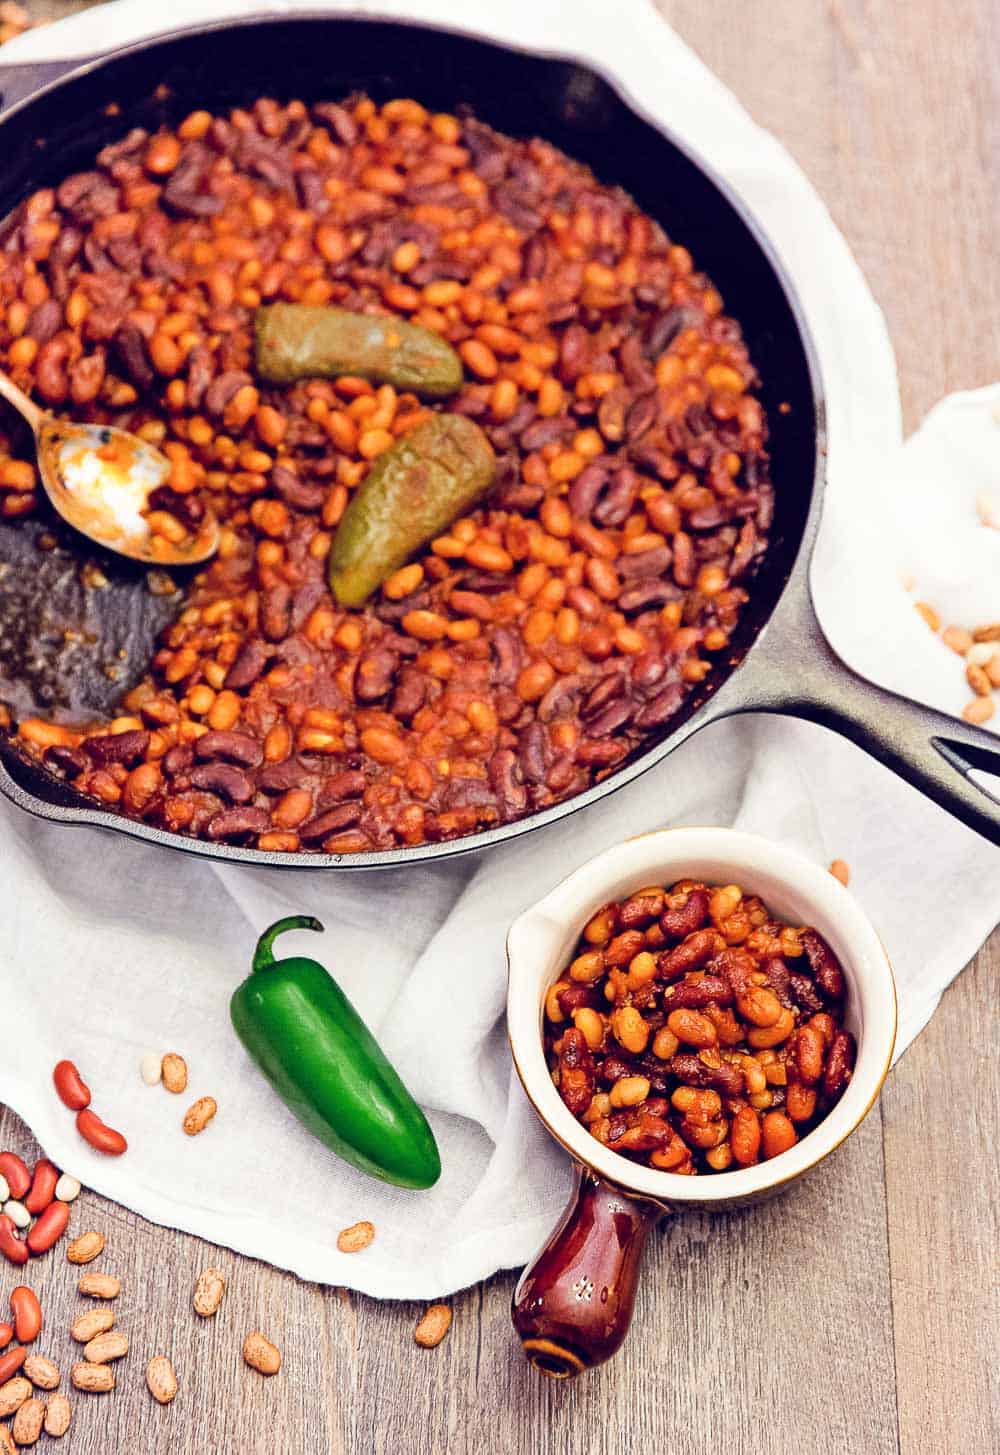 bbq baked beans, whole food plant based, side, beans, bbq, baked beans, gluten free, oil free, refined sugar free, healthy, vegan, vegetarian